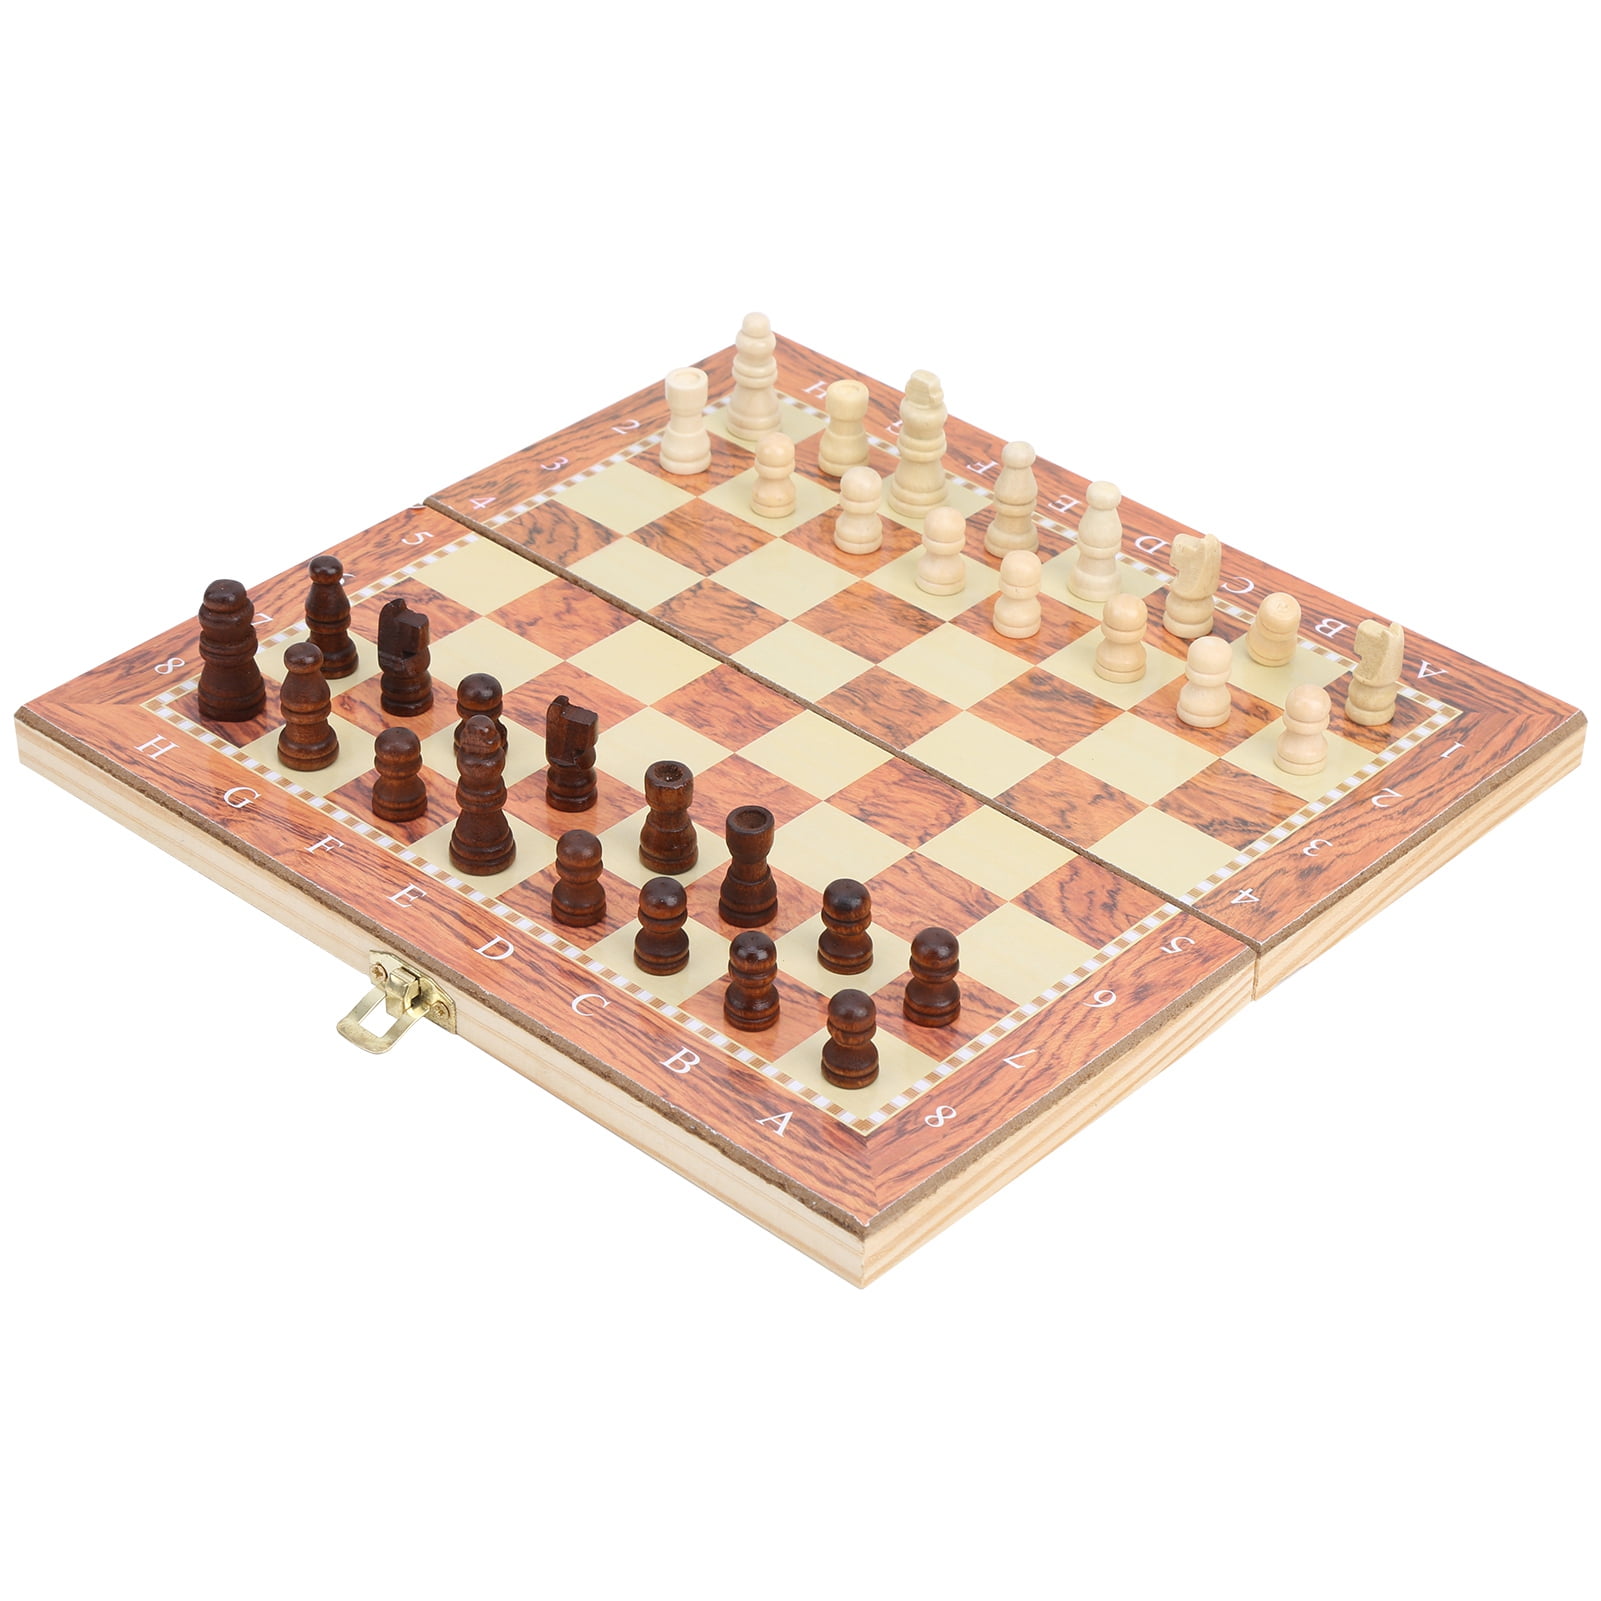 Wooden International Chess Set Board Travel Games Chess New Design 3 In 1 